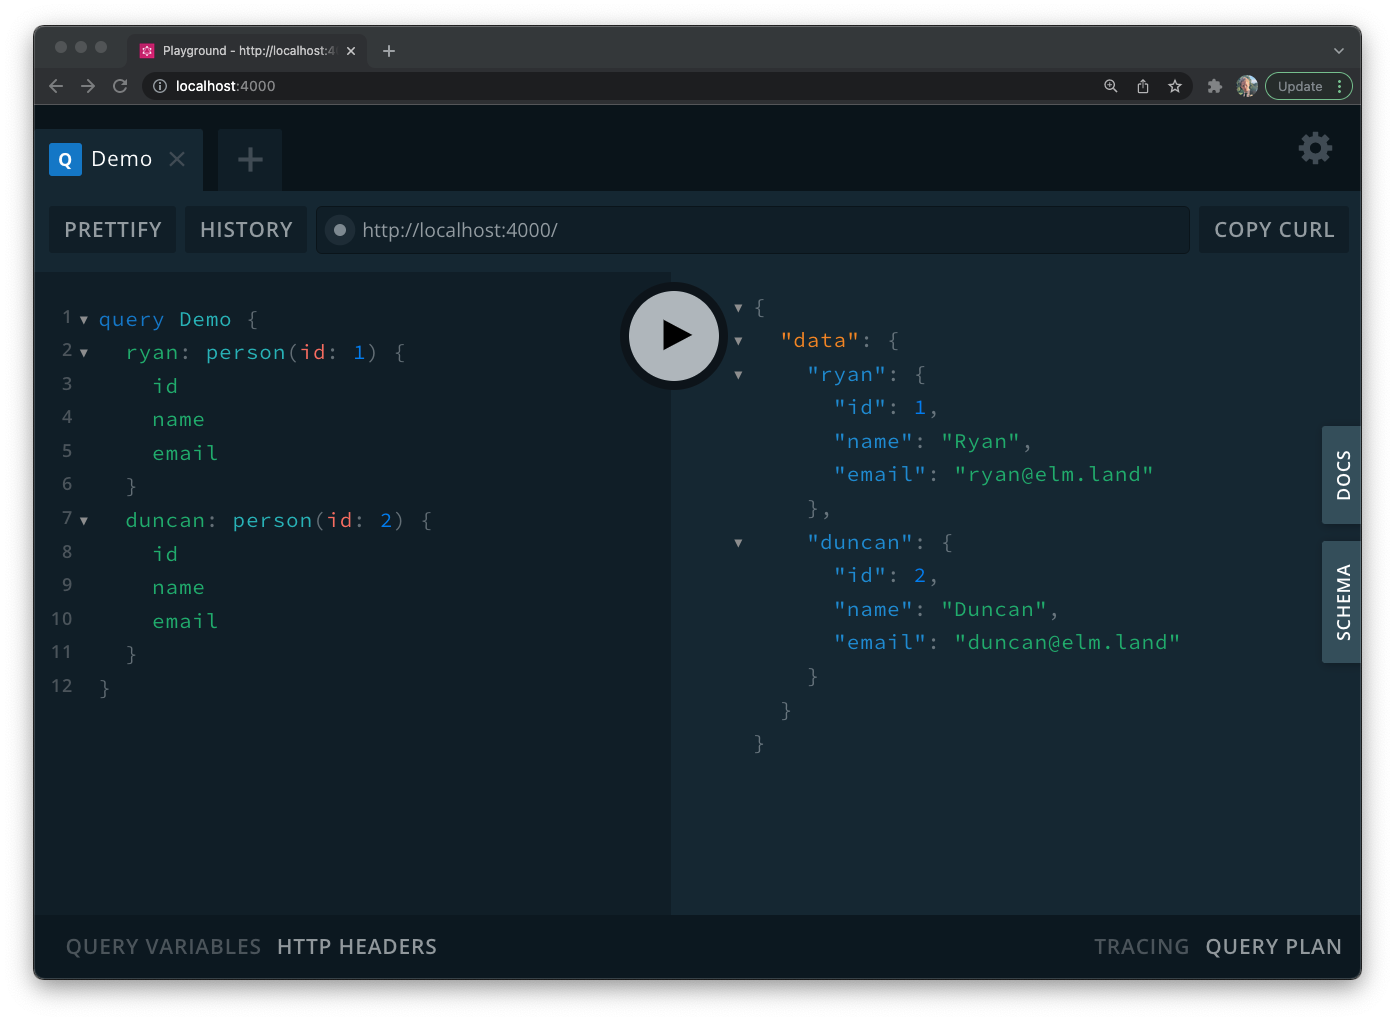 A screenshot of a demo query in the GraphQL playground